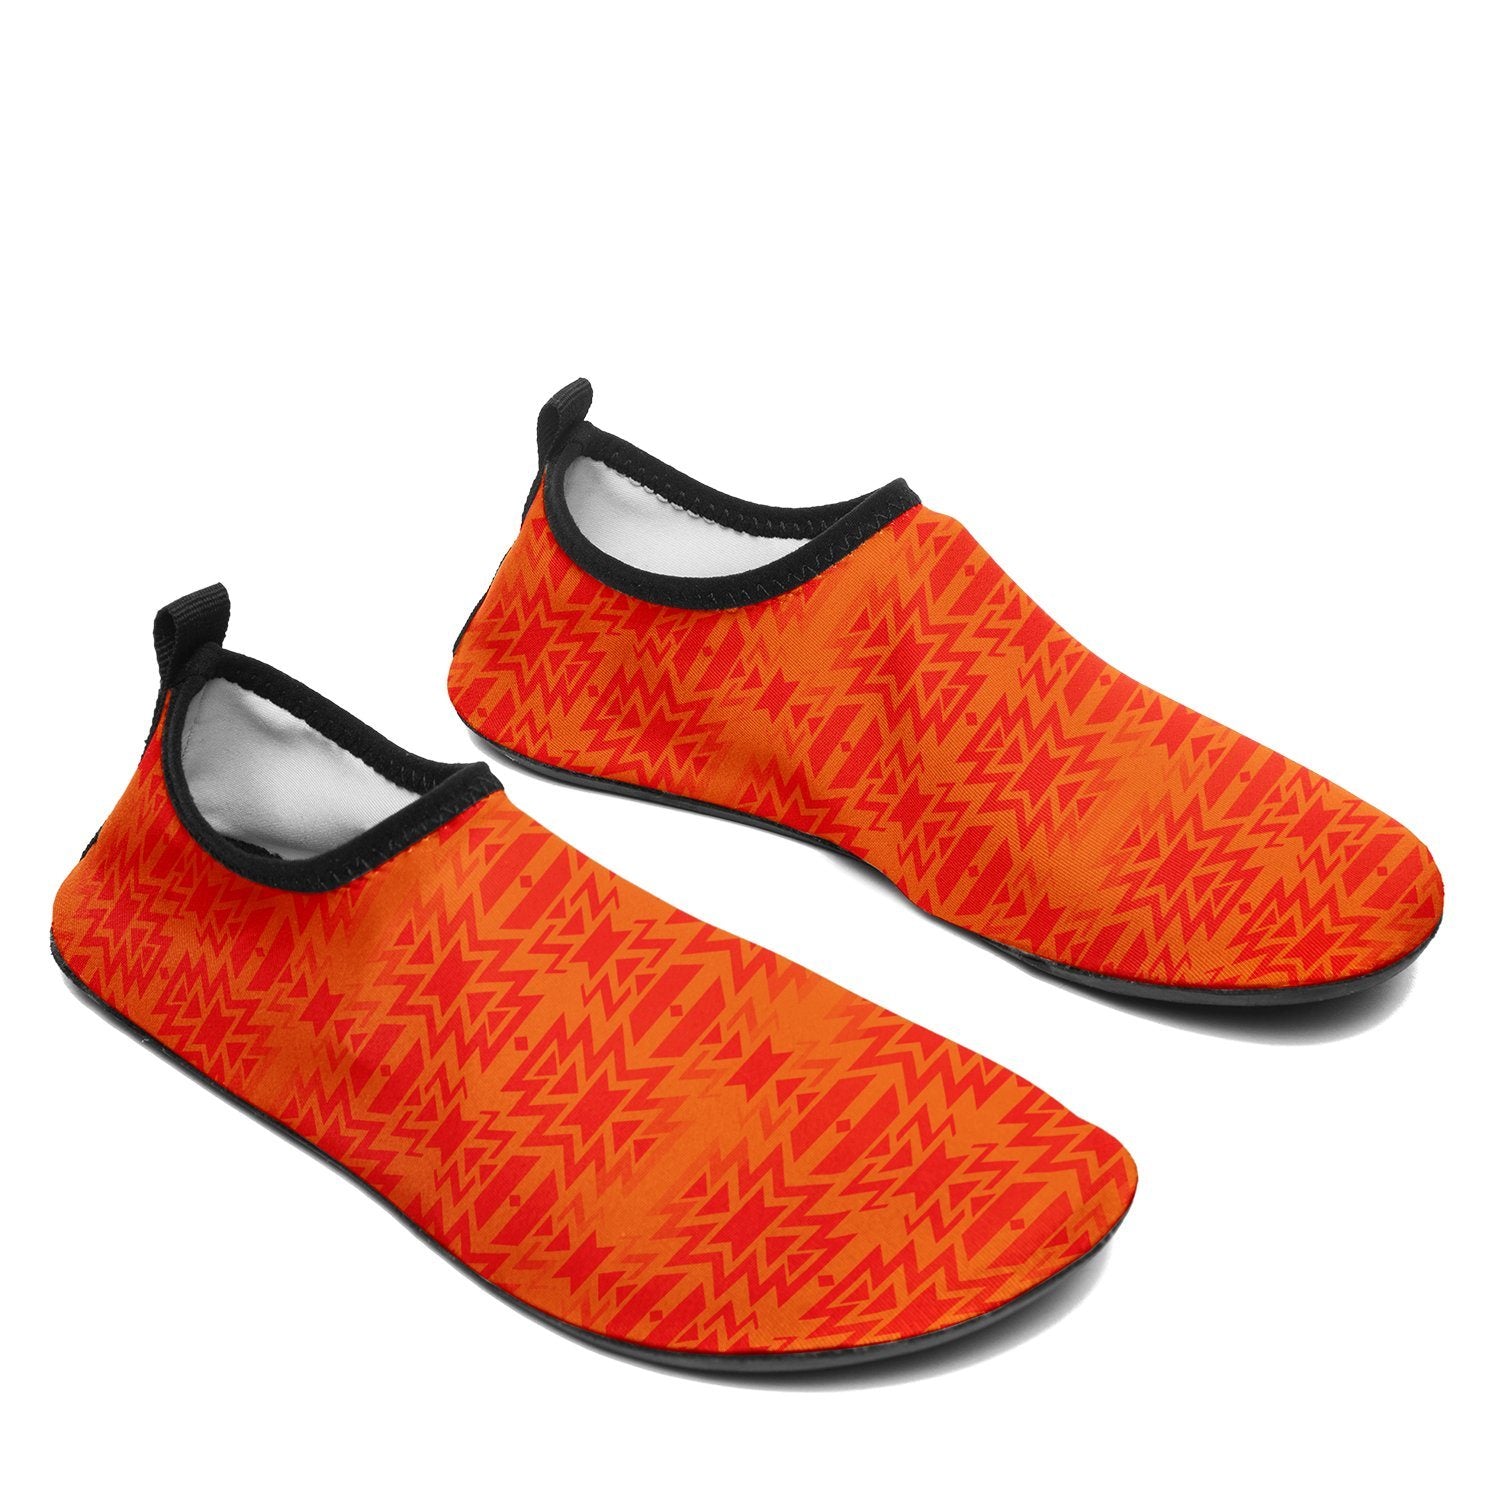 Fire Colors and Turquoise Orange Sockamoccs Slip On Shoes Herman 